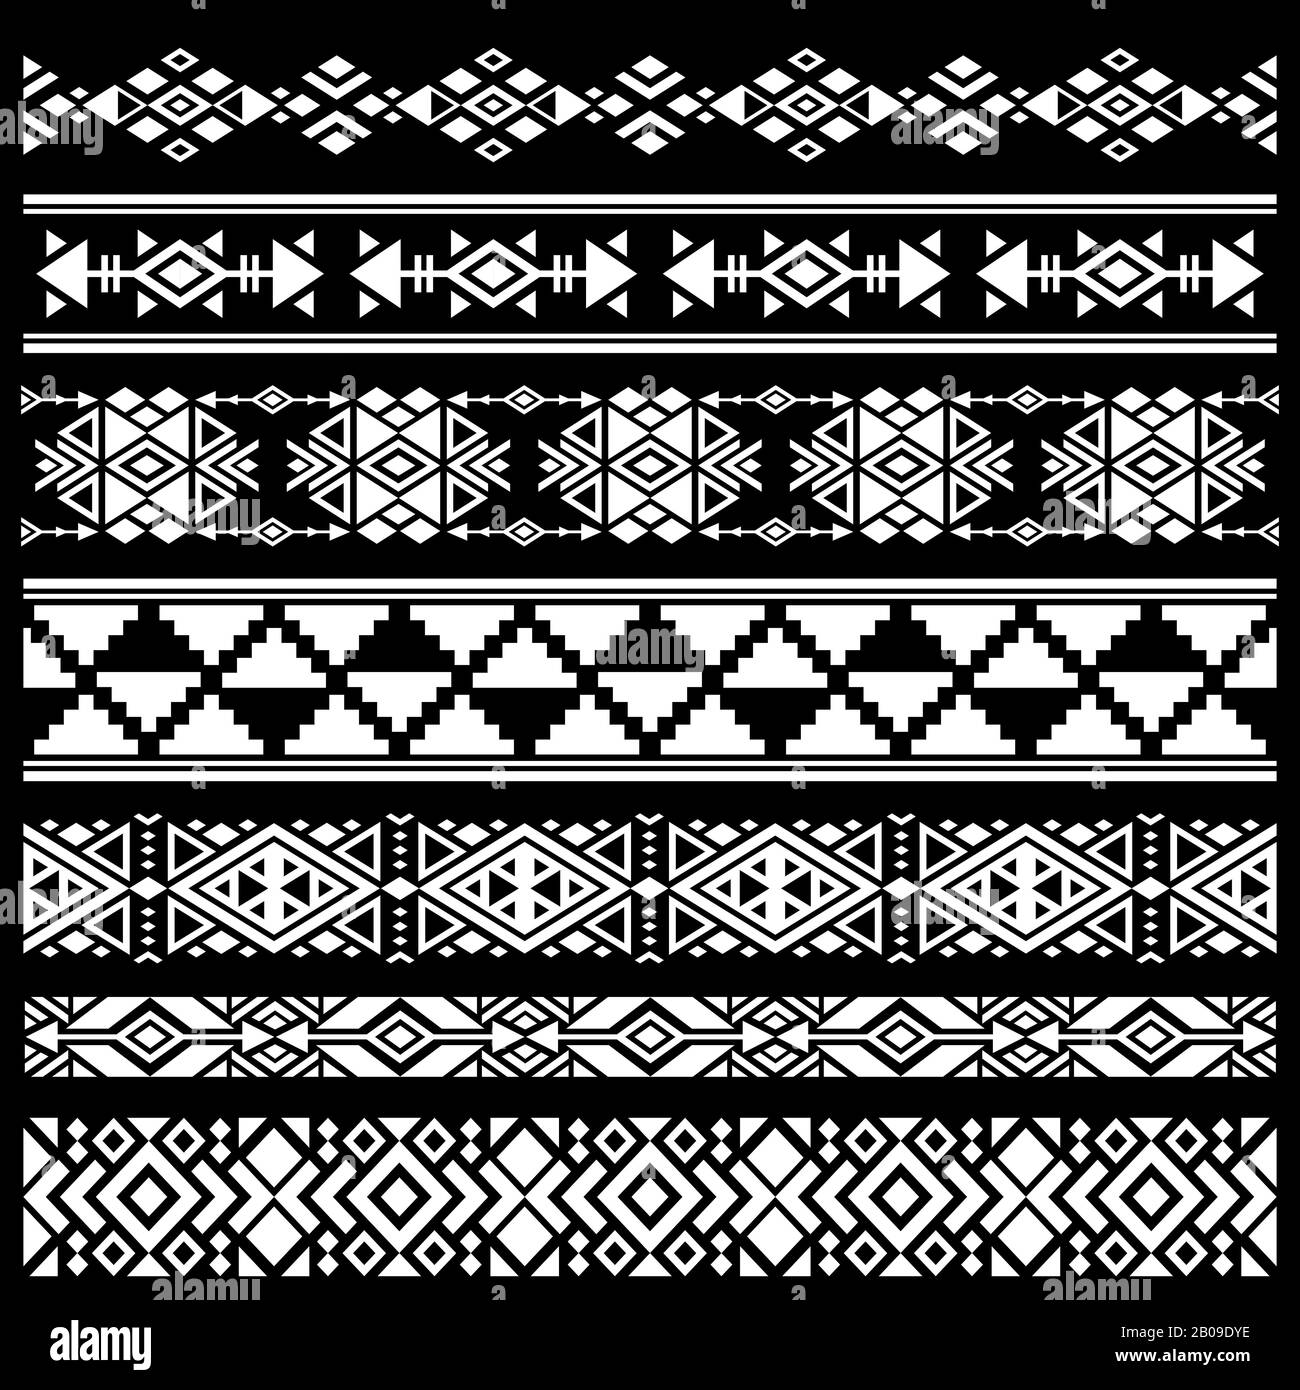 Mexican, american tribal art decor vector brushes, borders. Black white mexican decoration, ancient geometric mexican decoration illustration Stock Vector